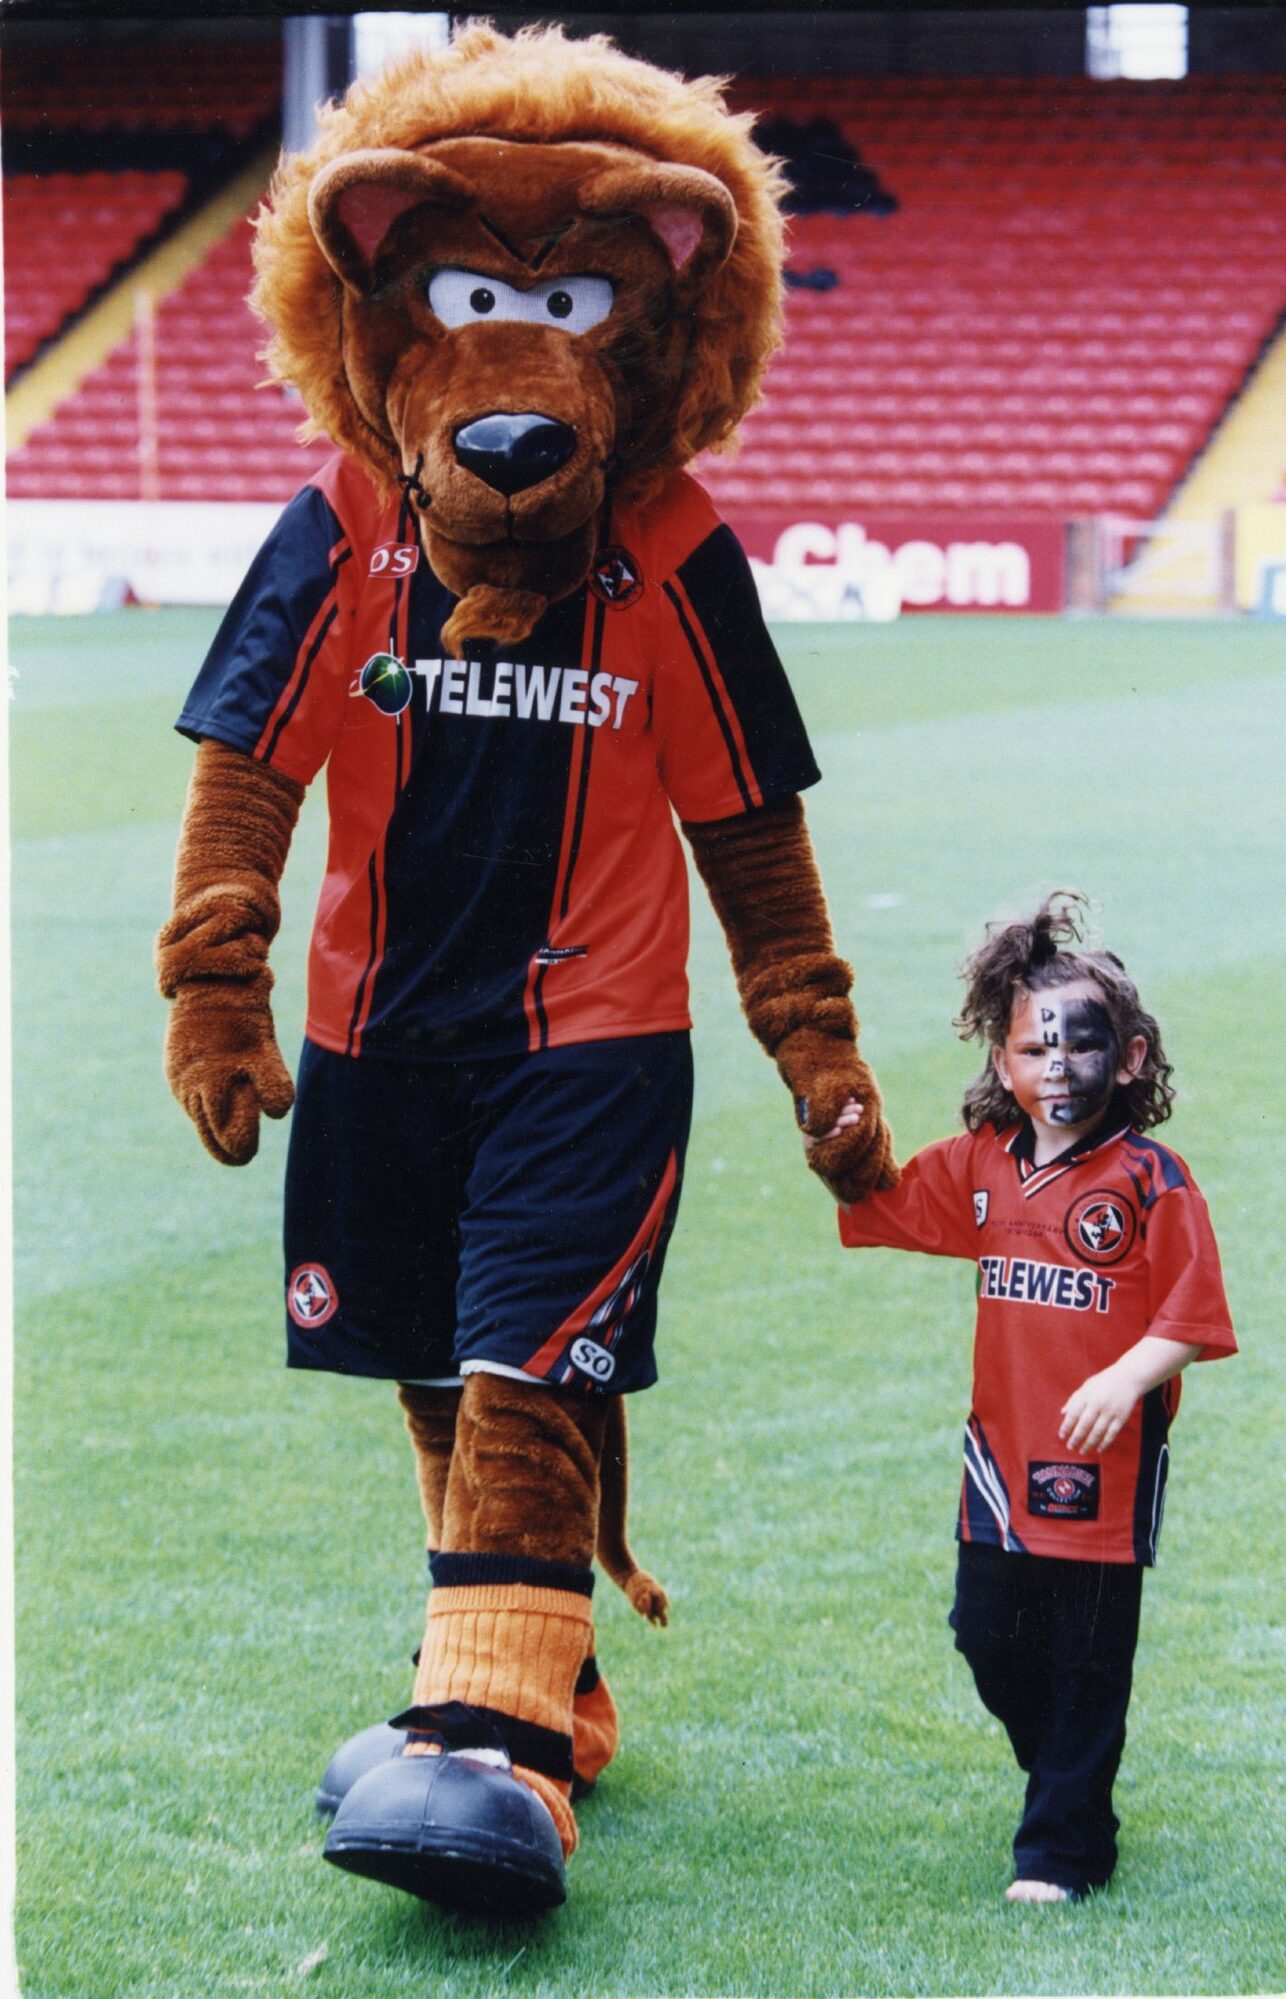 A young supporter gets to meet the Dundee United team mascot at the event in 1999. Image: DC Thomson.